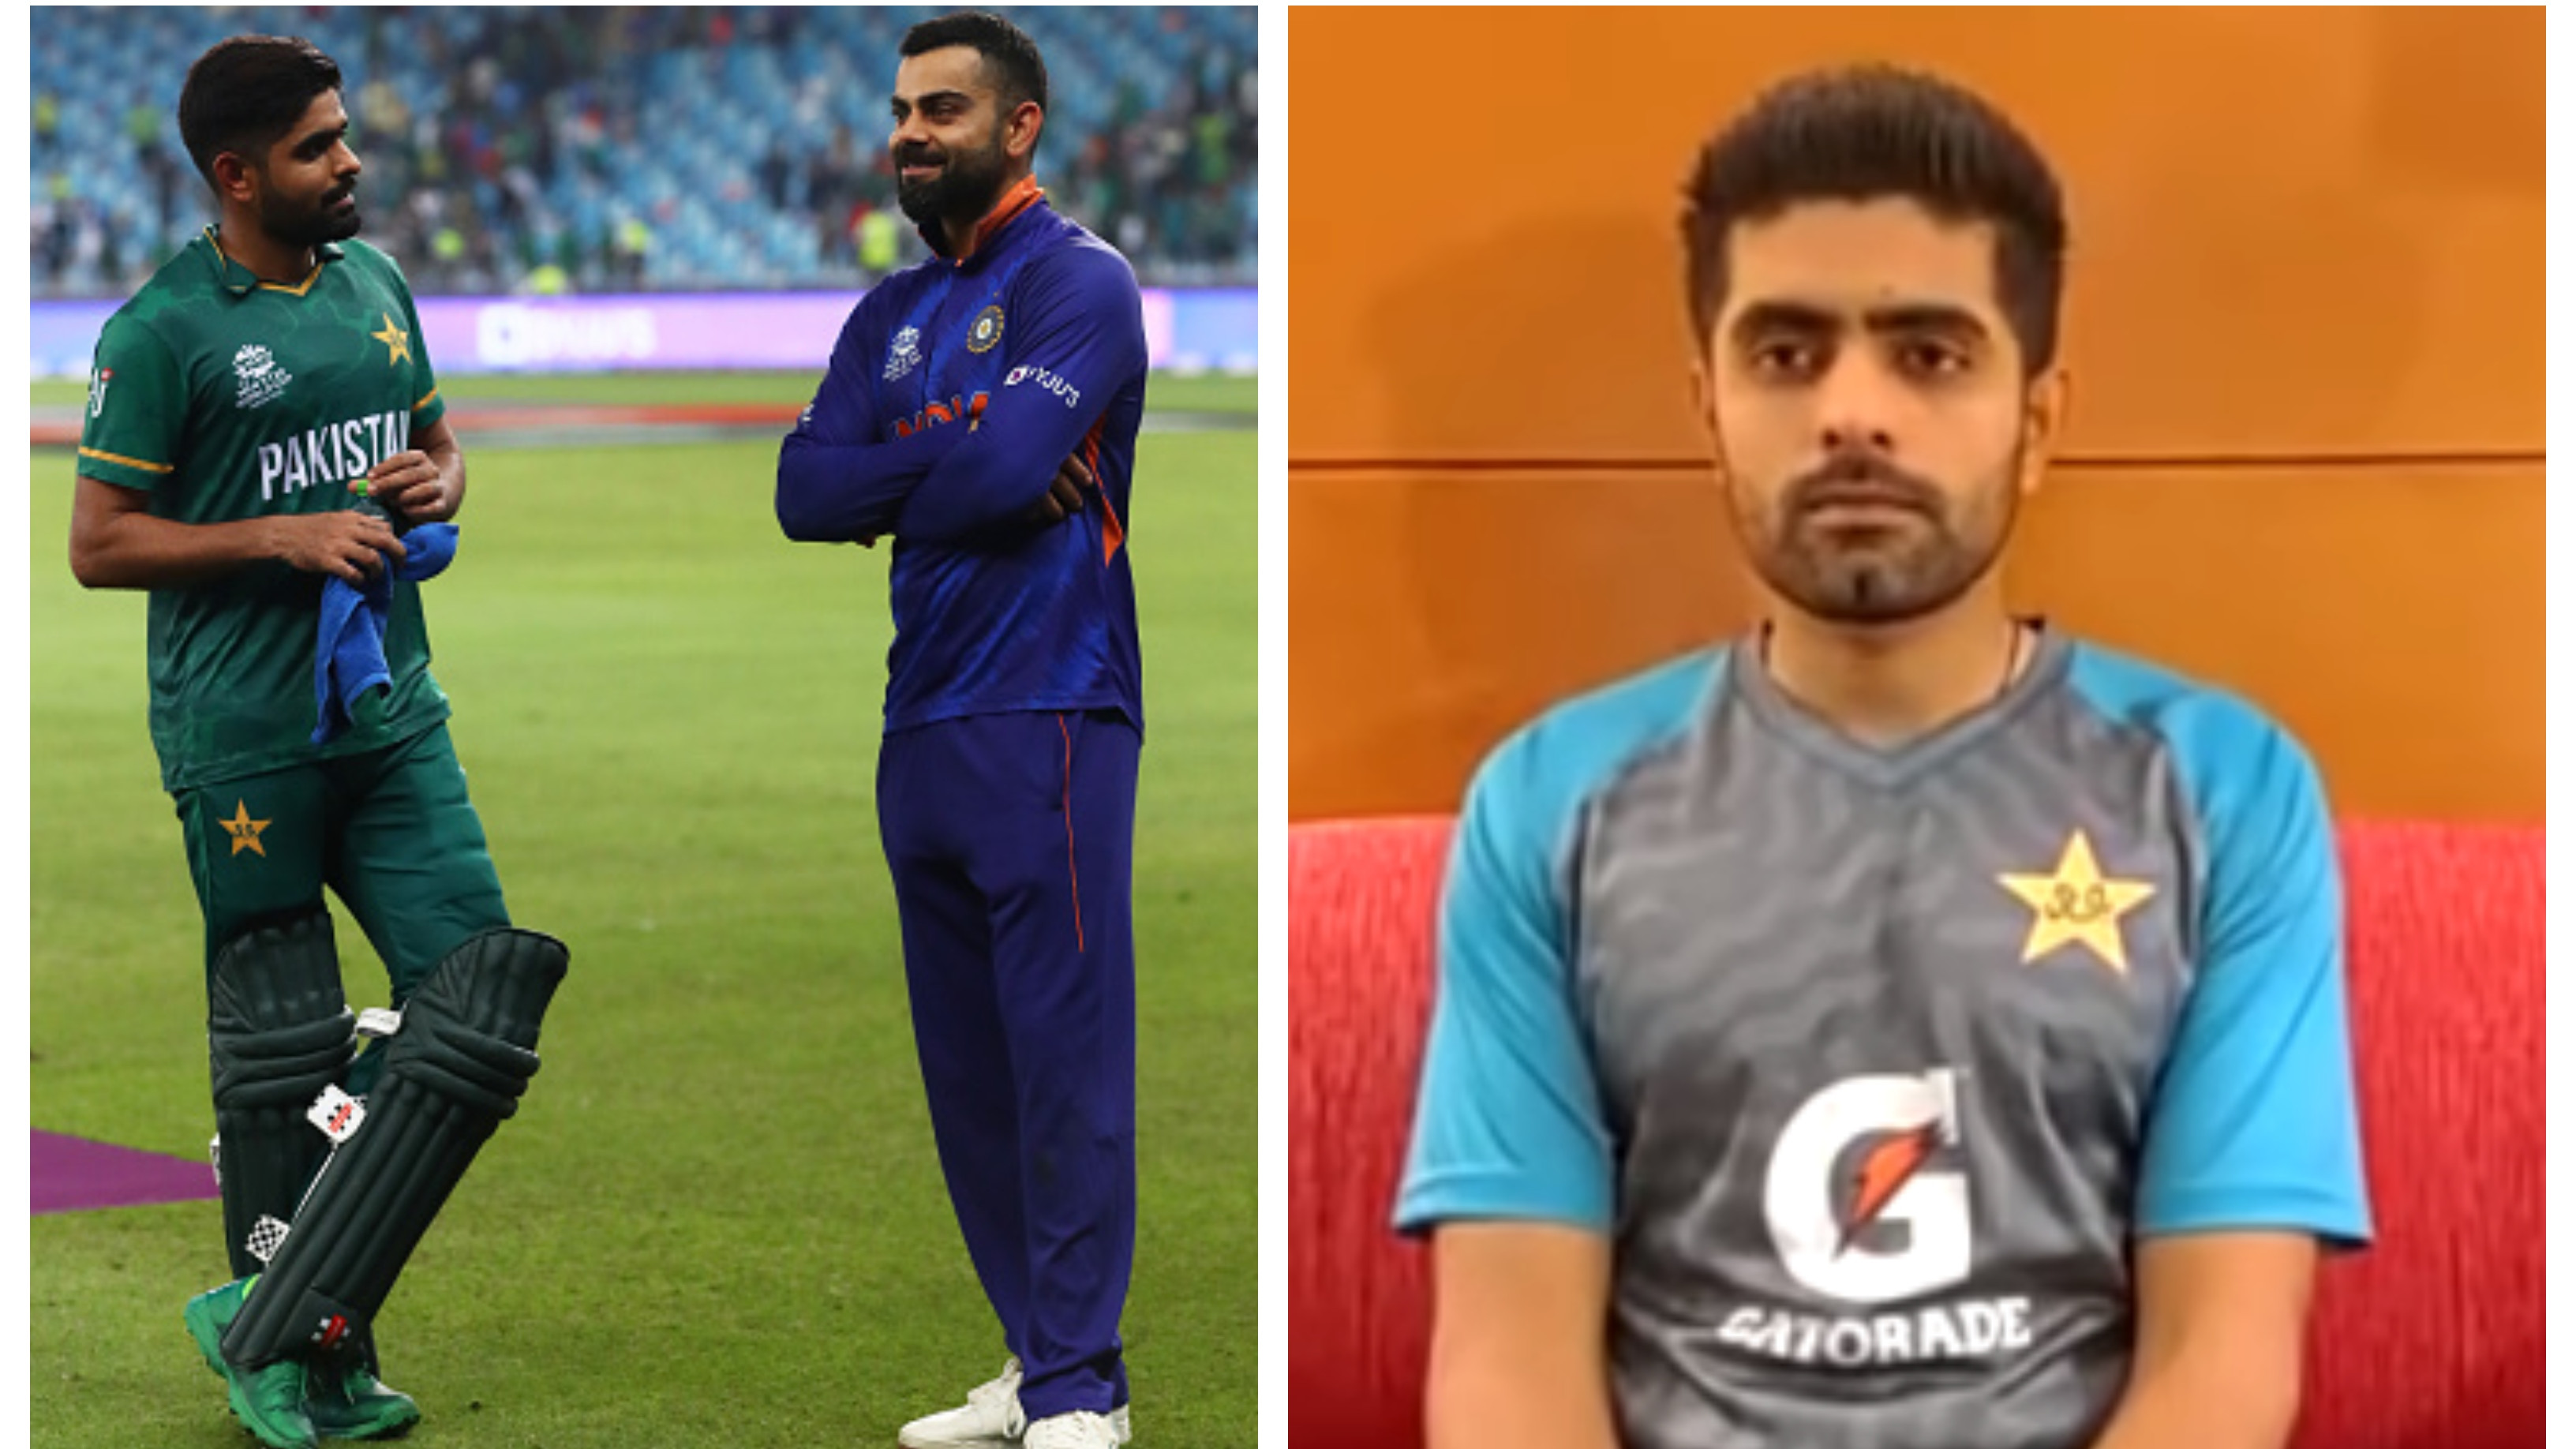 WATCH: Babar’s reply to a reporter after being asked about his chat with Kohli and his removal as captain